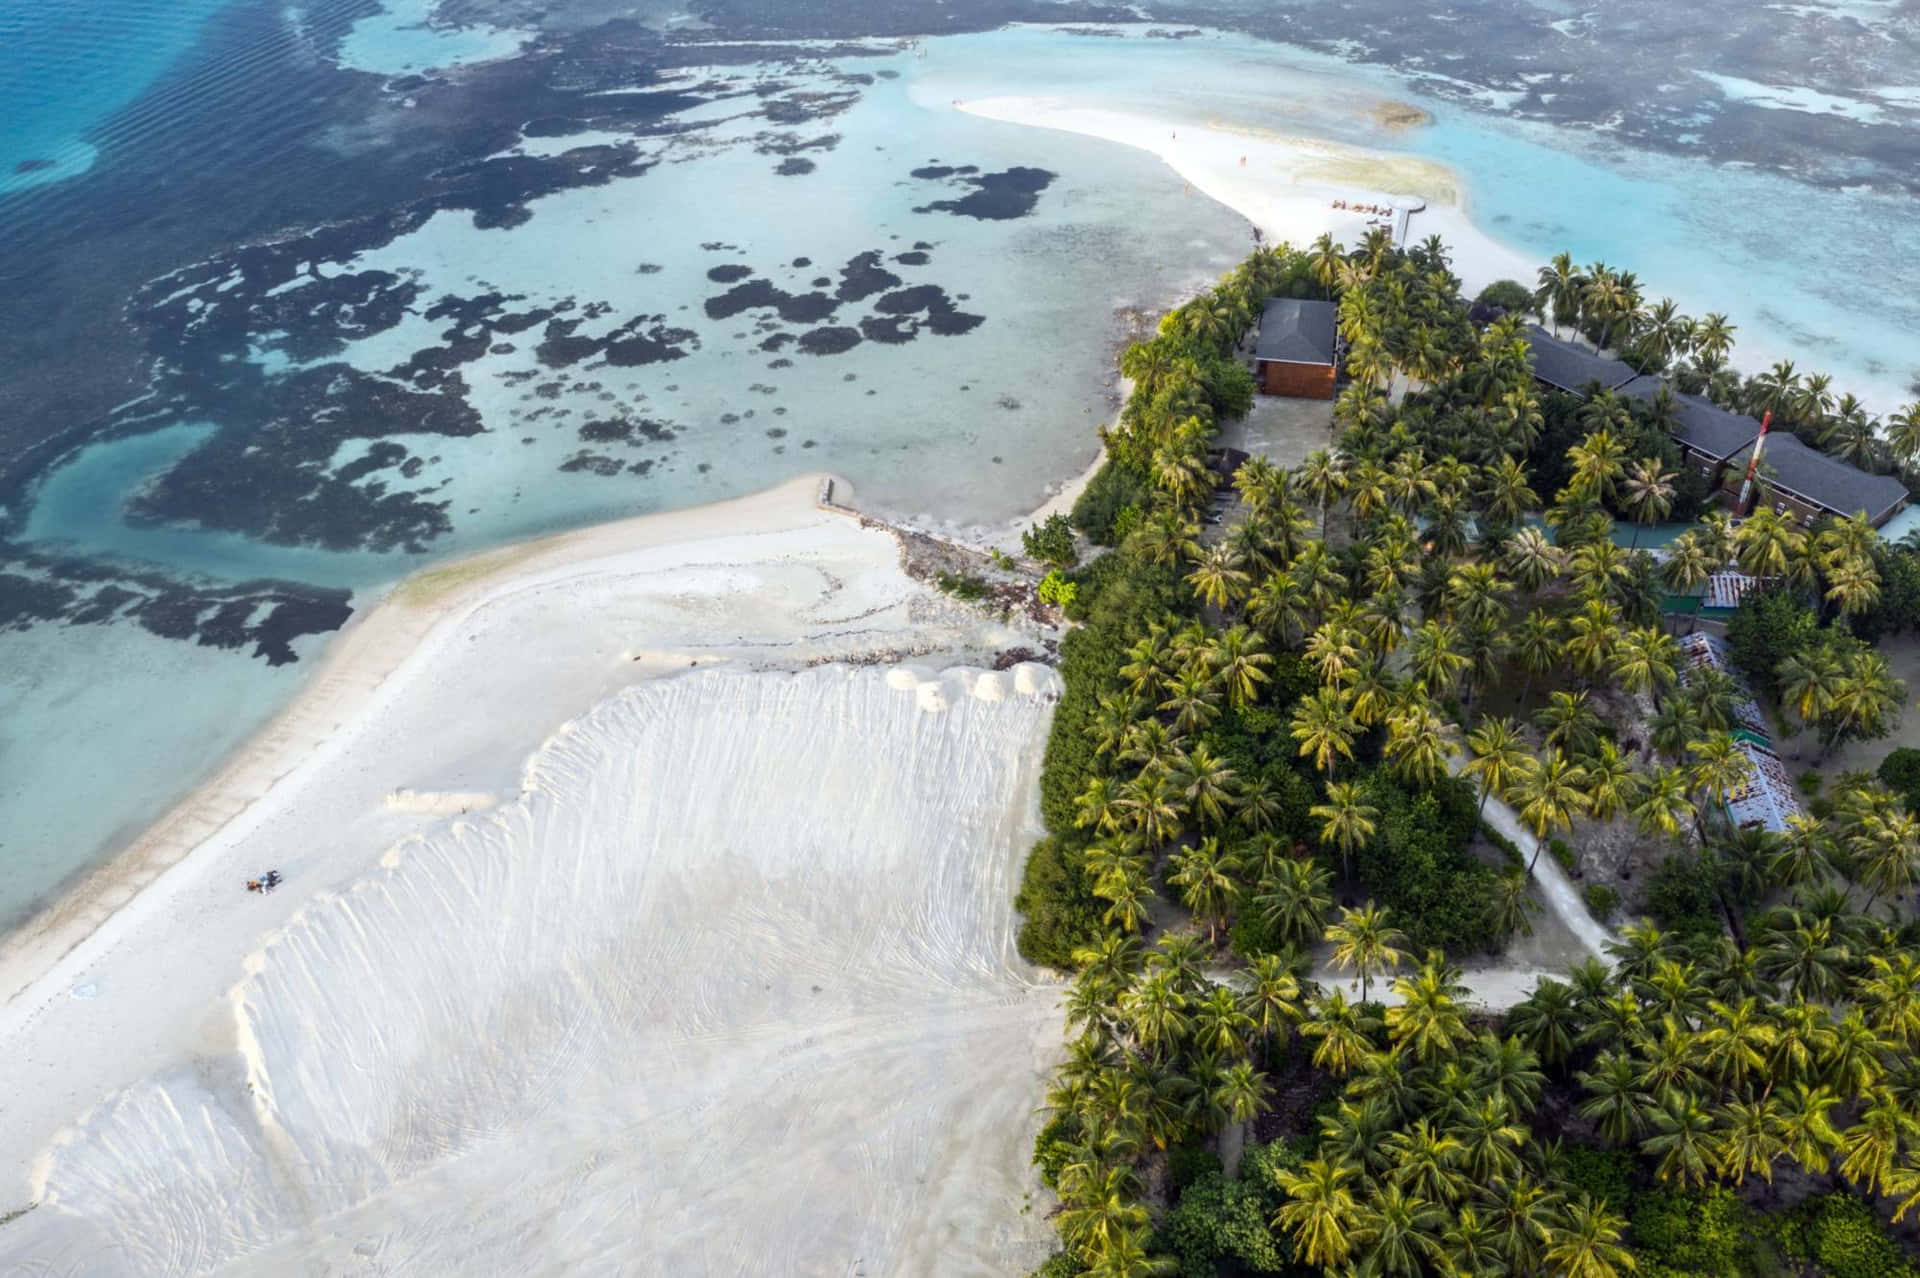 An Aerial View Of An Island With Sand And Trees